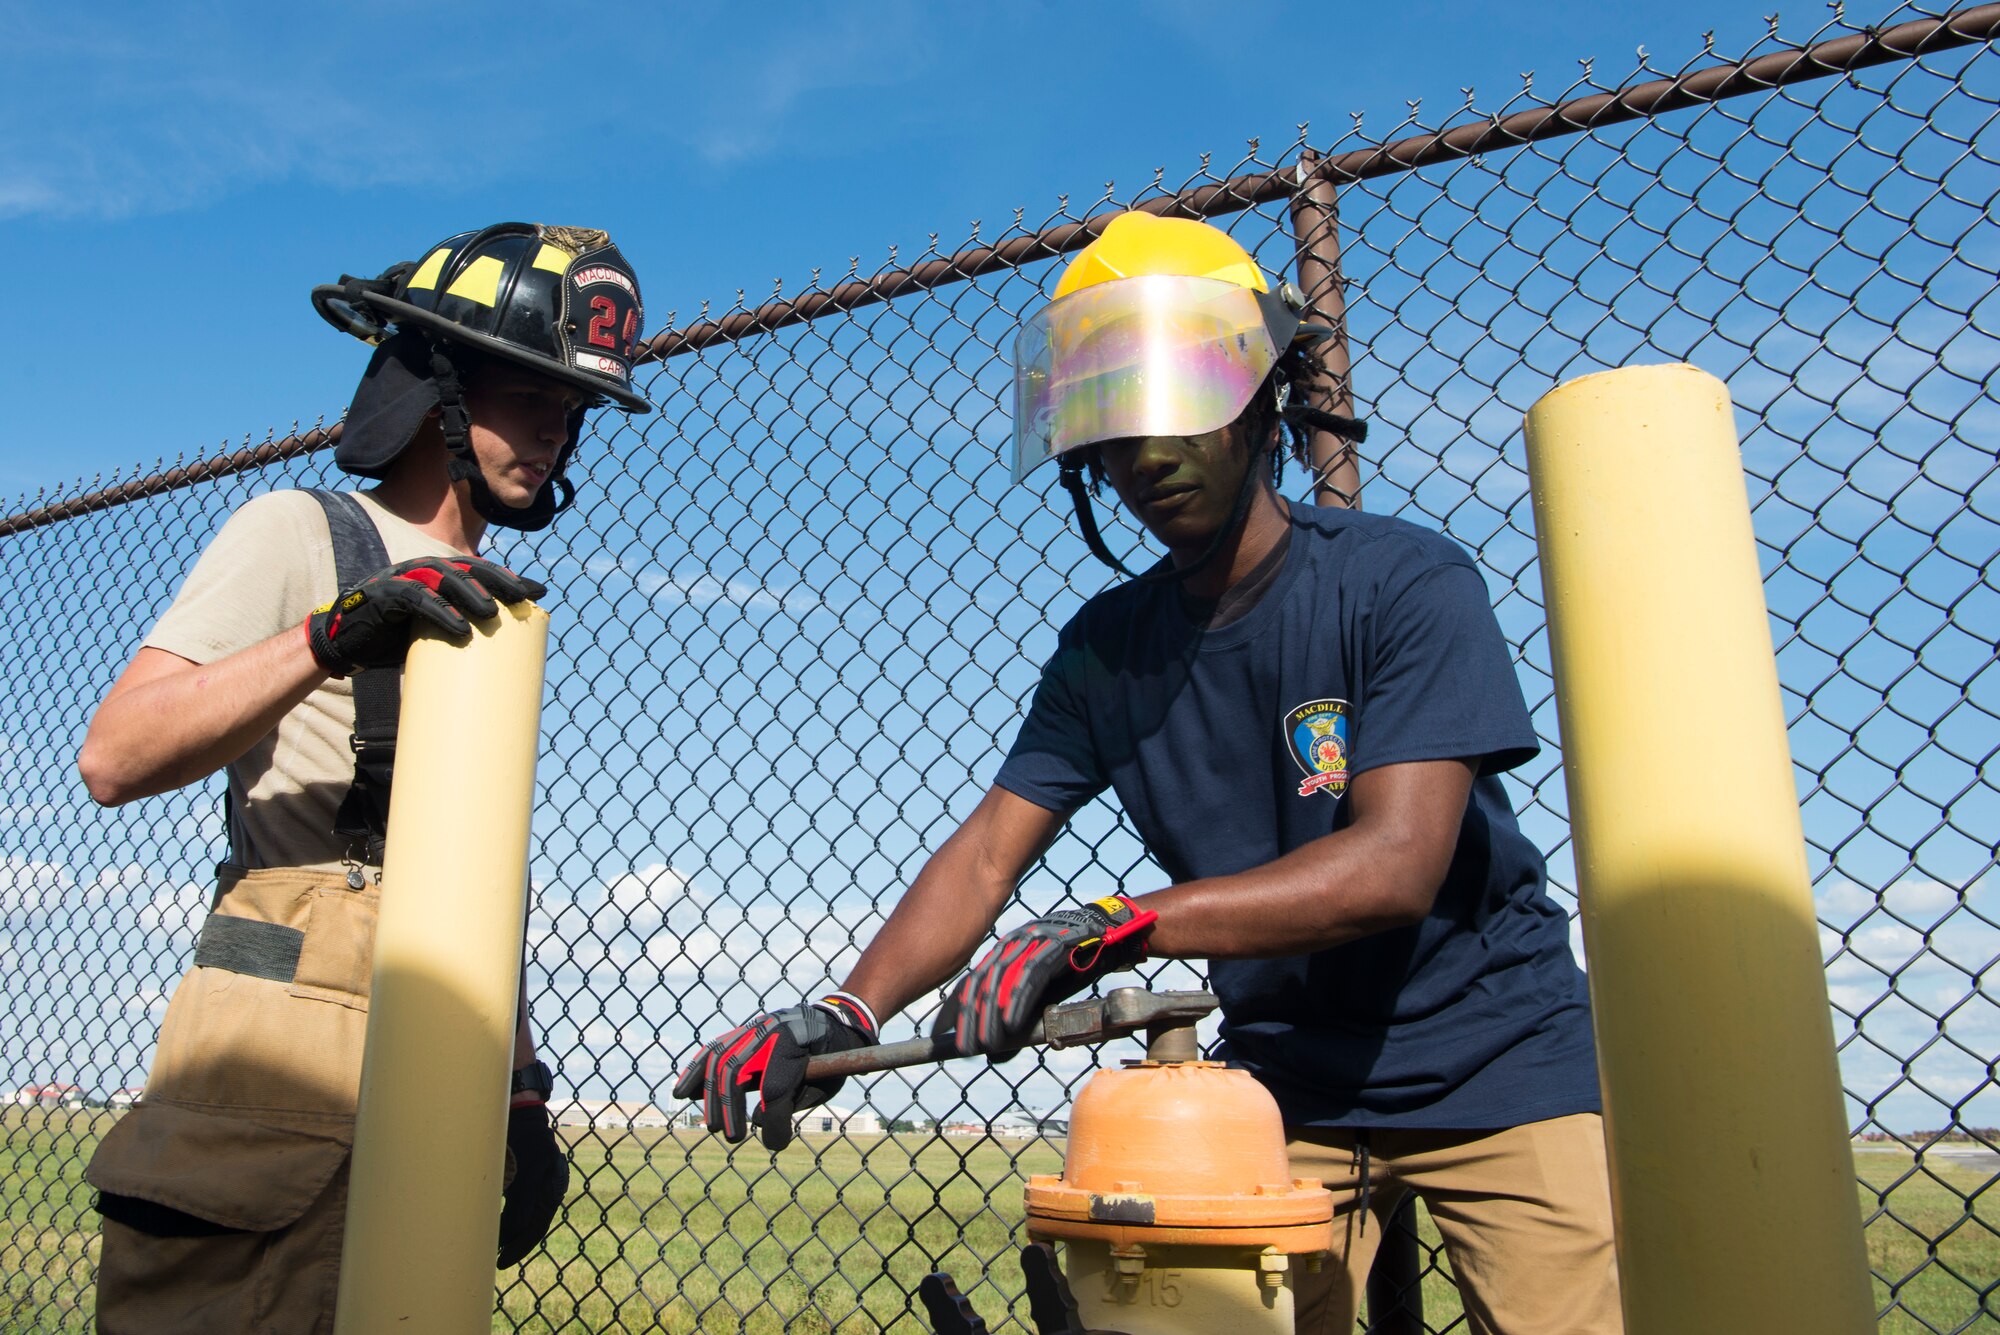 Senior Airman Kenneth Carr, a 6th Civil Engineer Squadron (CES) Fire Emergency Services (FES) Flight firefighter, teaches a student how to access a fire hydrant at MacDill Air Force Base, Fla., Oct. 15, 2019.